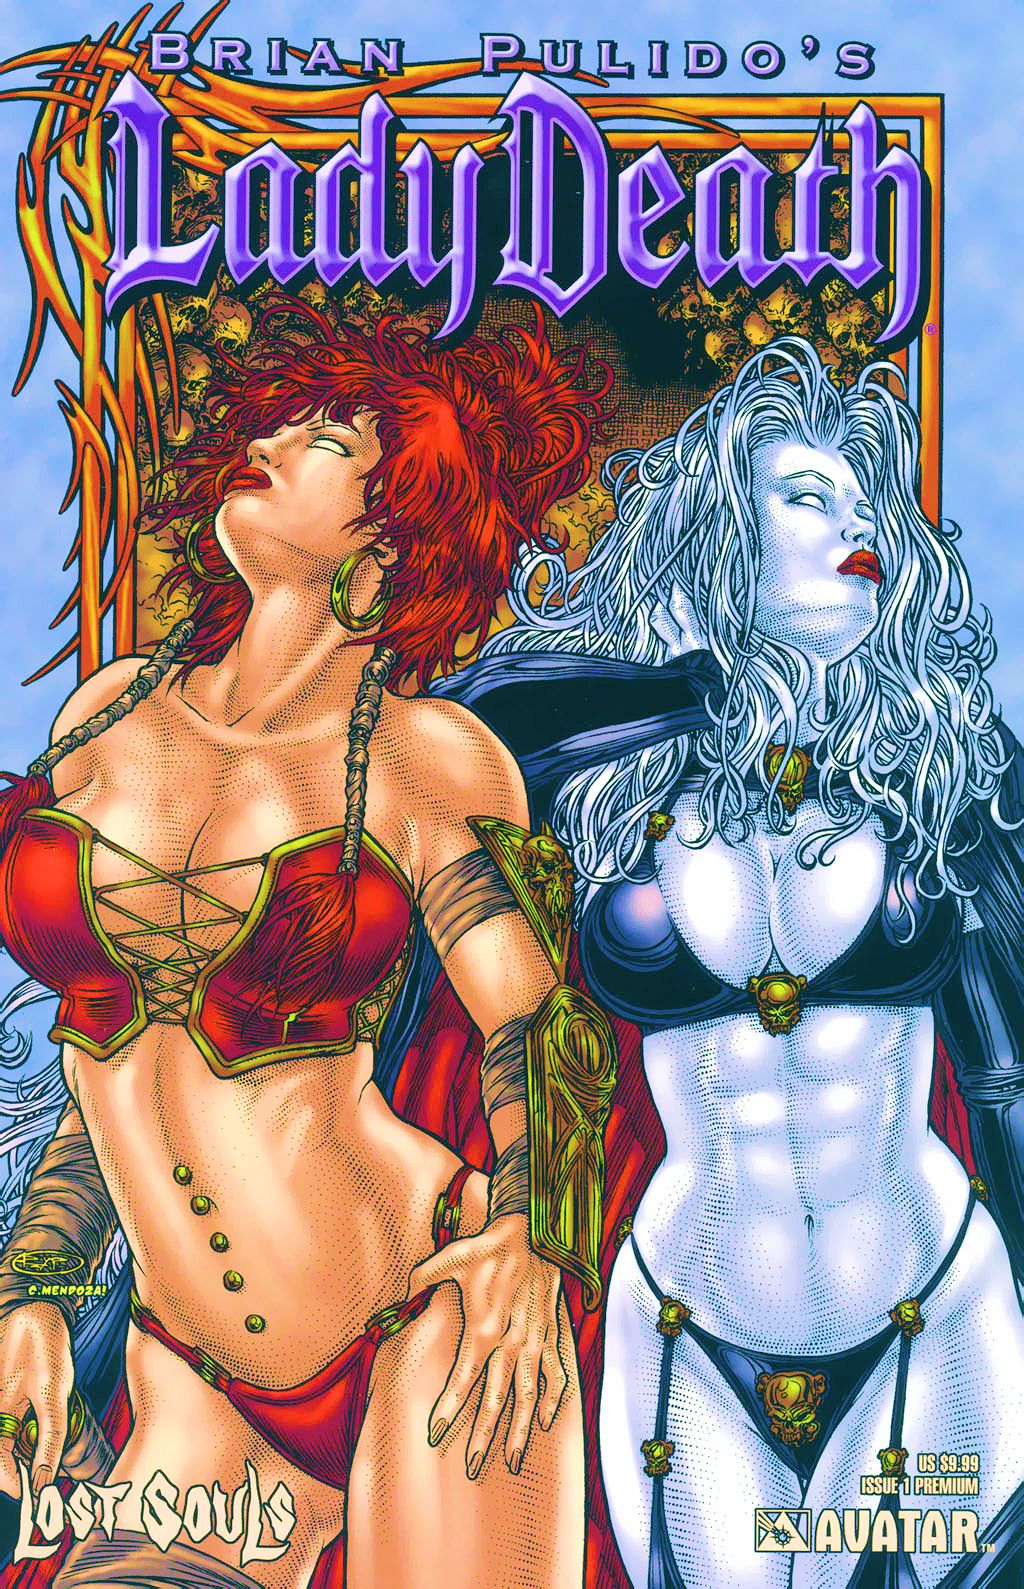 Read online Brian Pulido's Lady Death: Lost Souls comic -  Issue #1 - 4